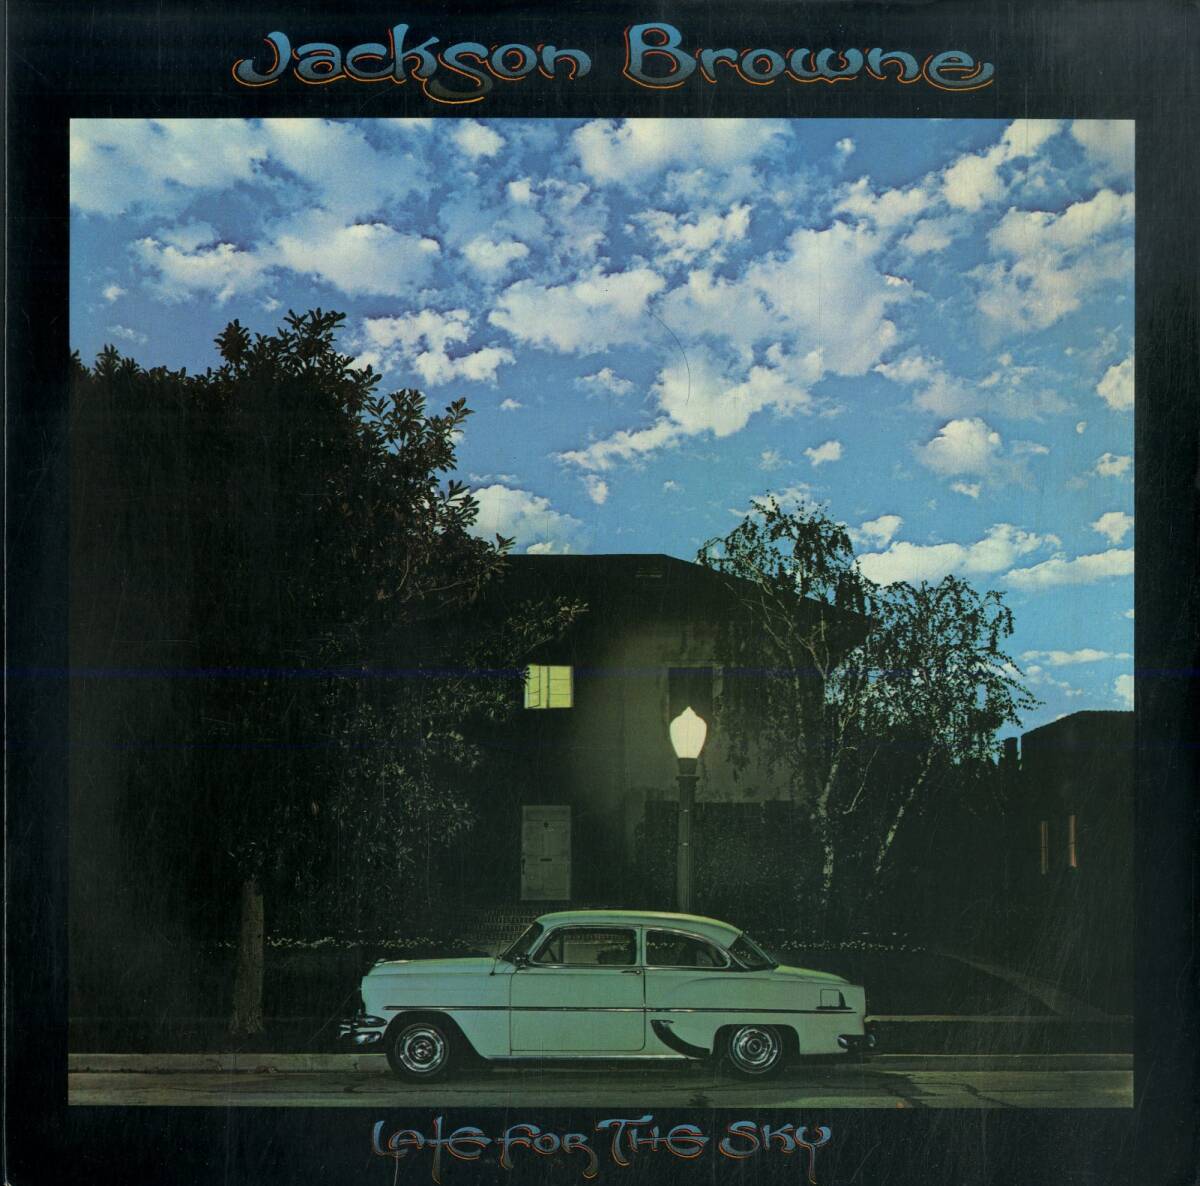 A00587477/LP/ジャクソン・ブラウン(JACKSON BROWNE)「Late For The Sky (1974年・7E-1017)」_画像1